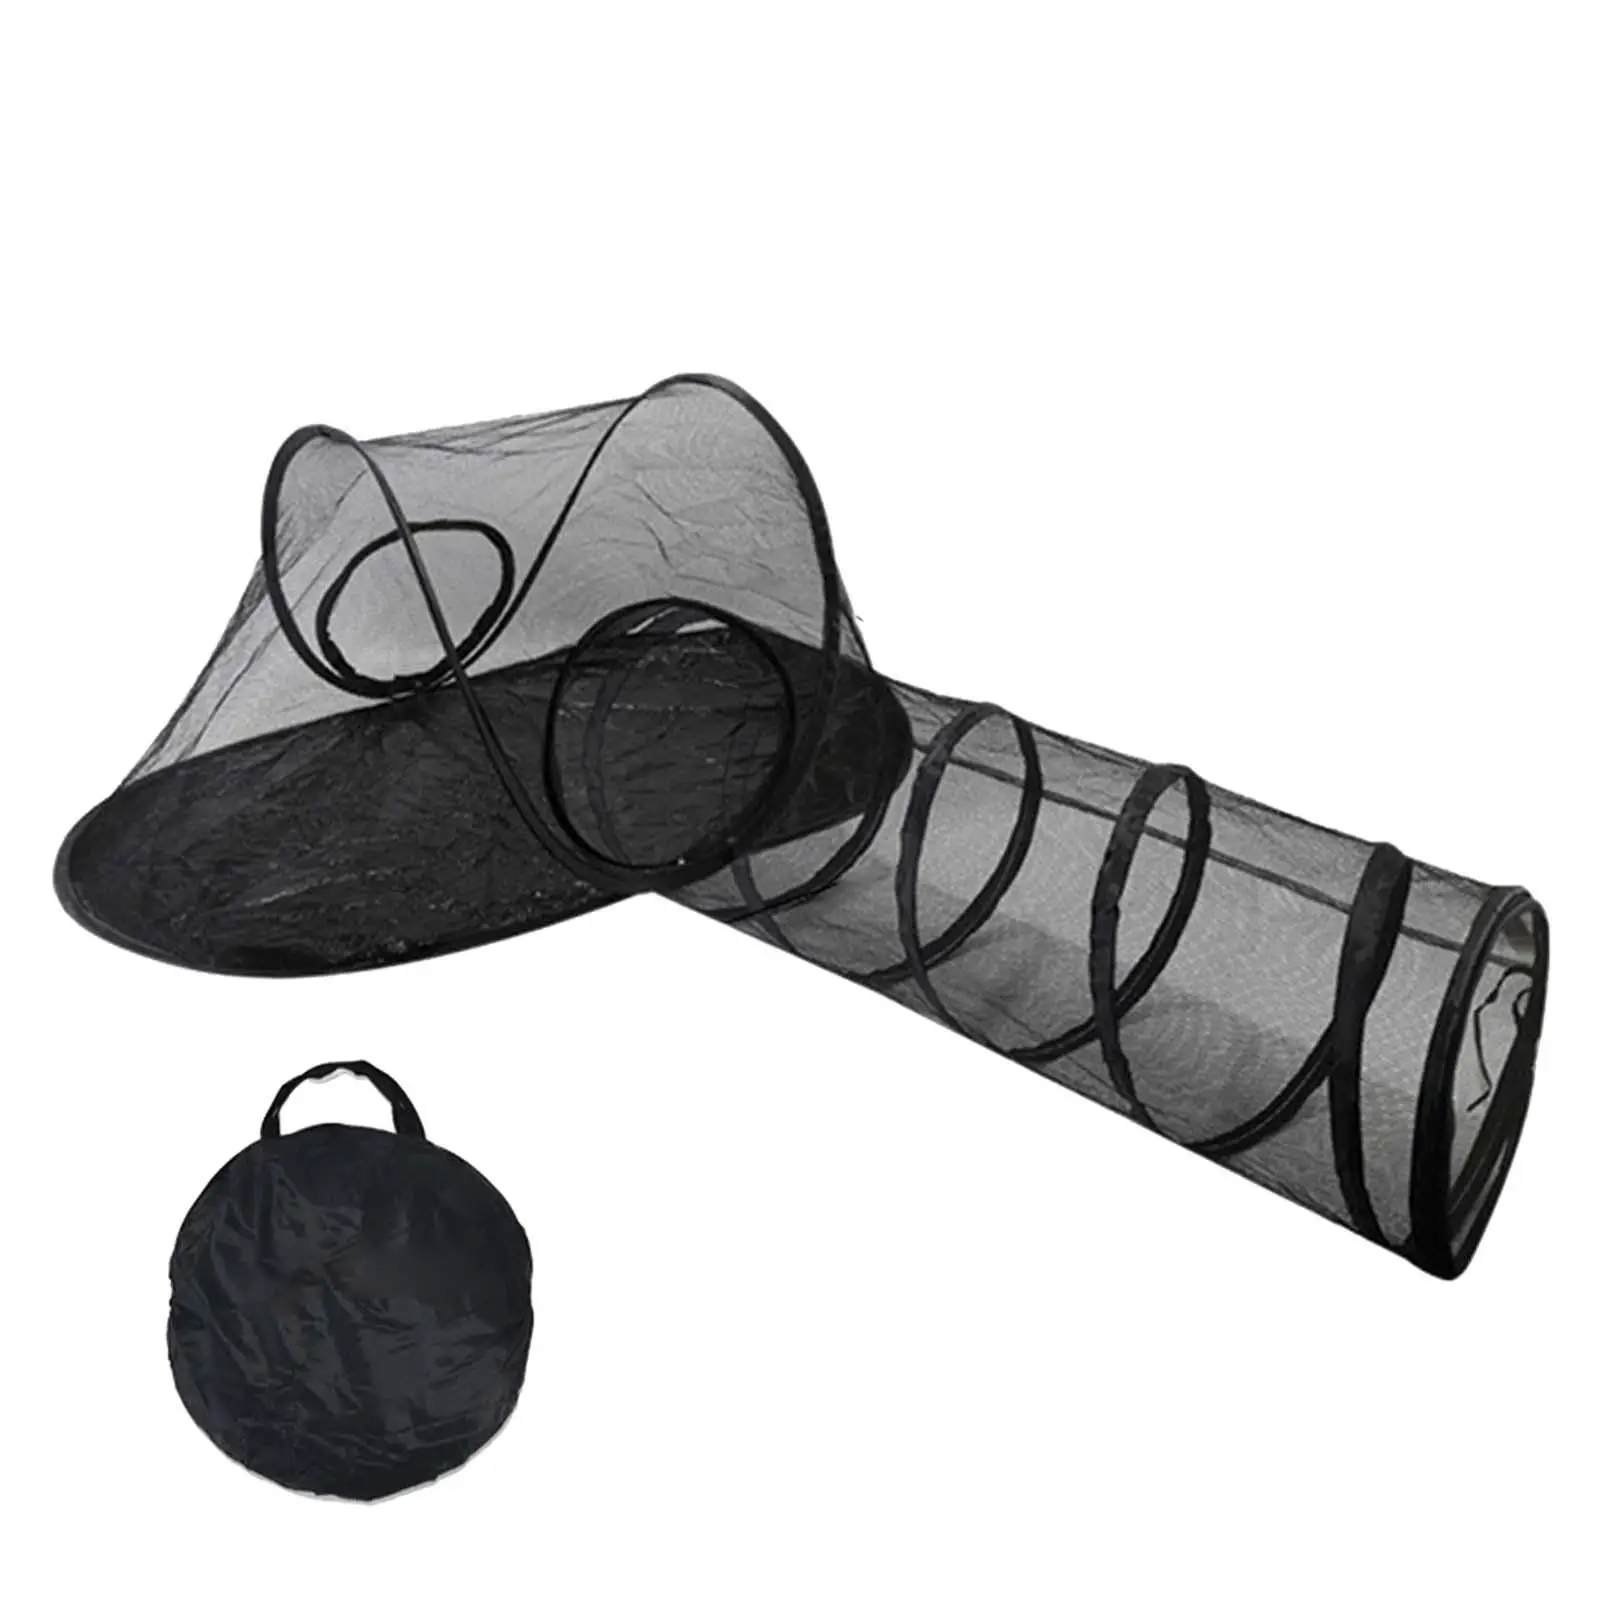 Cat Tent and Tunnel Foldable Portable Interactive Cat Toy Zipper Entrance for Puppy Indoor Cats Small Dog Small Animals Travel